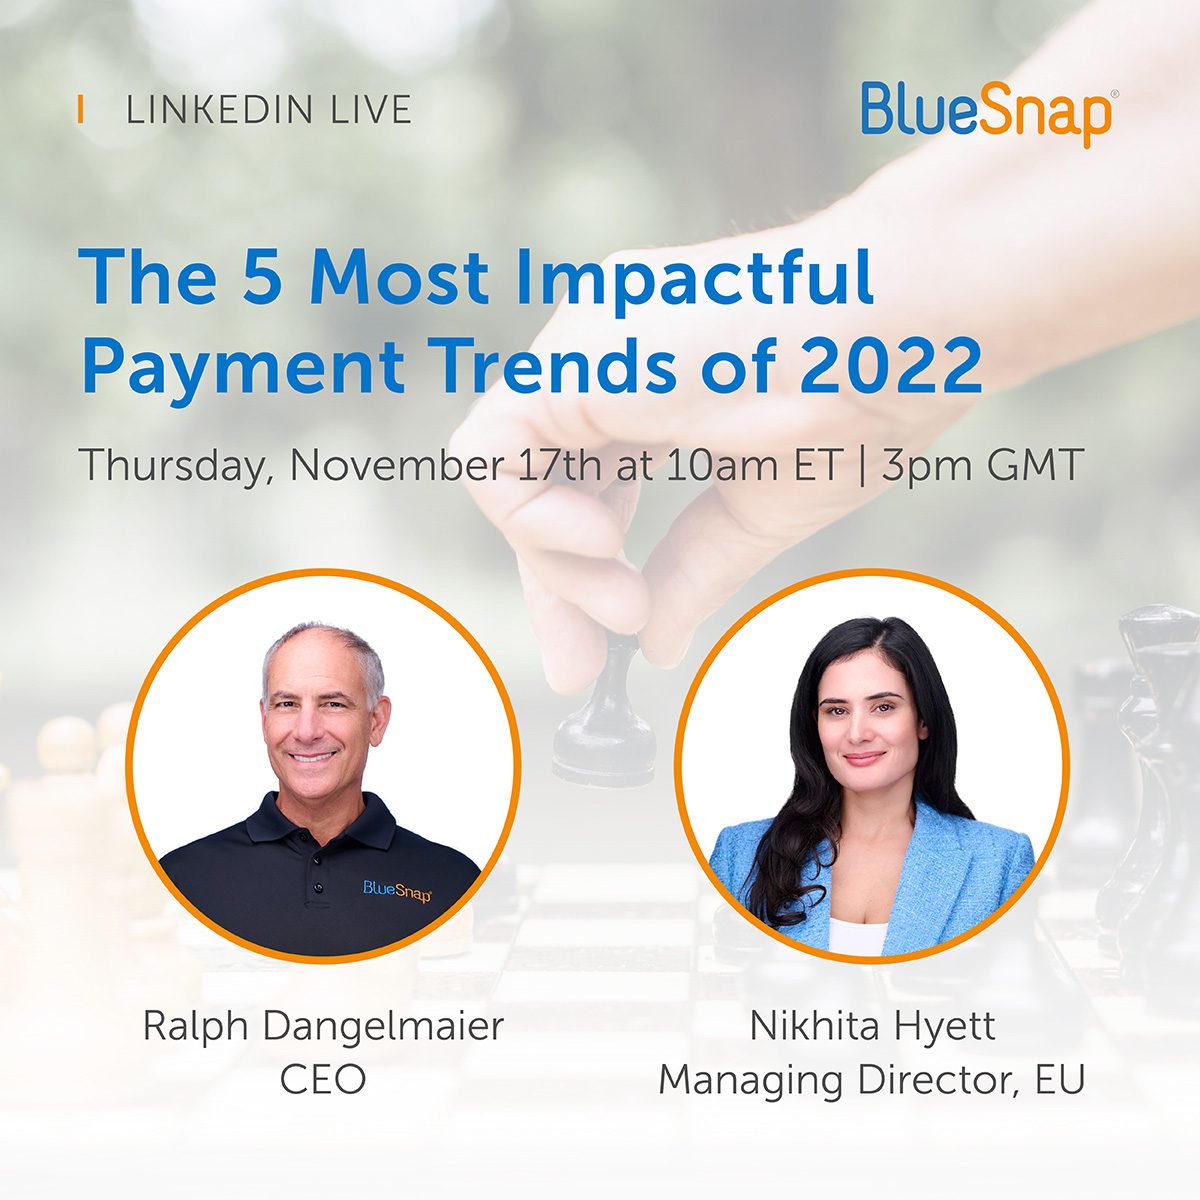 The 5 Most Impactful Payment Trends of 2022